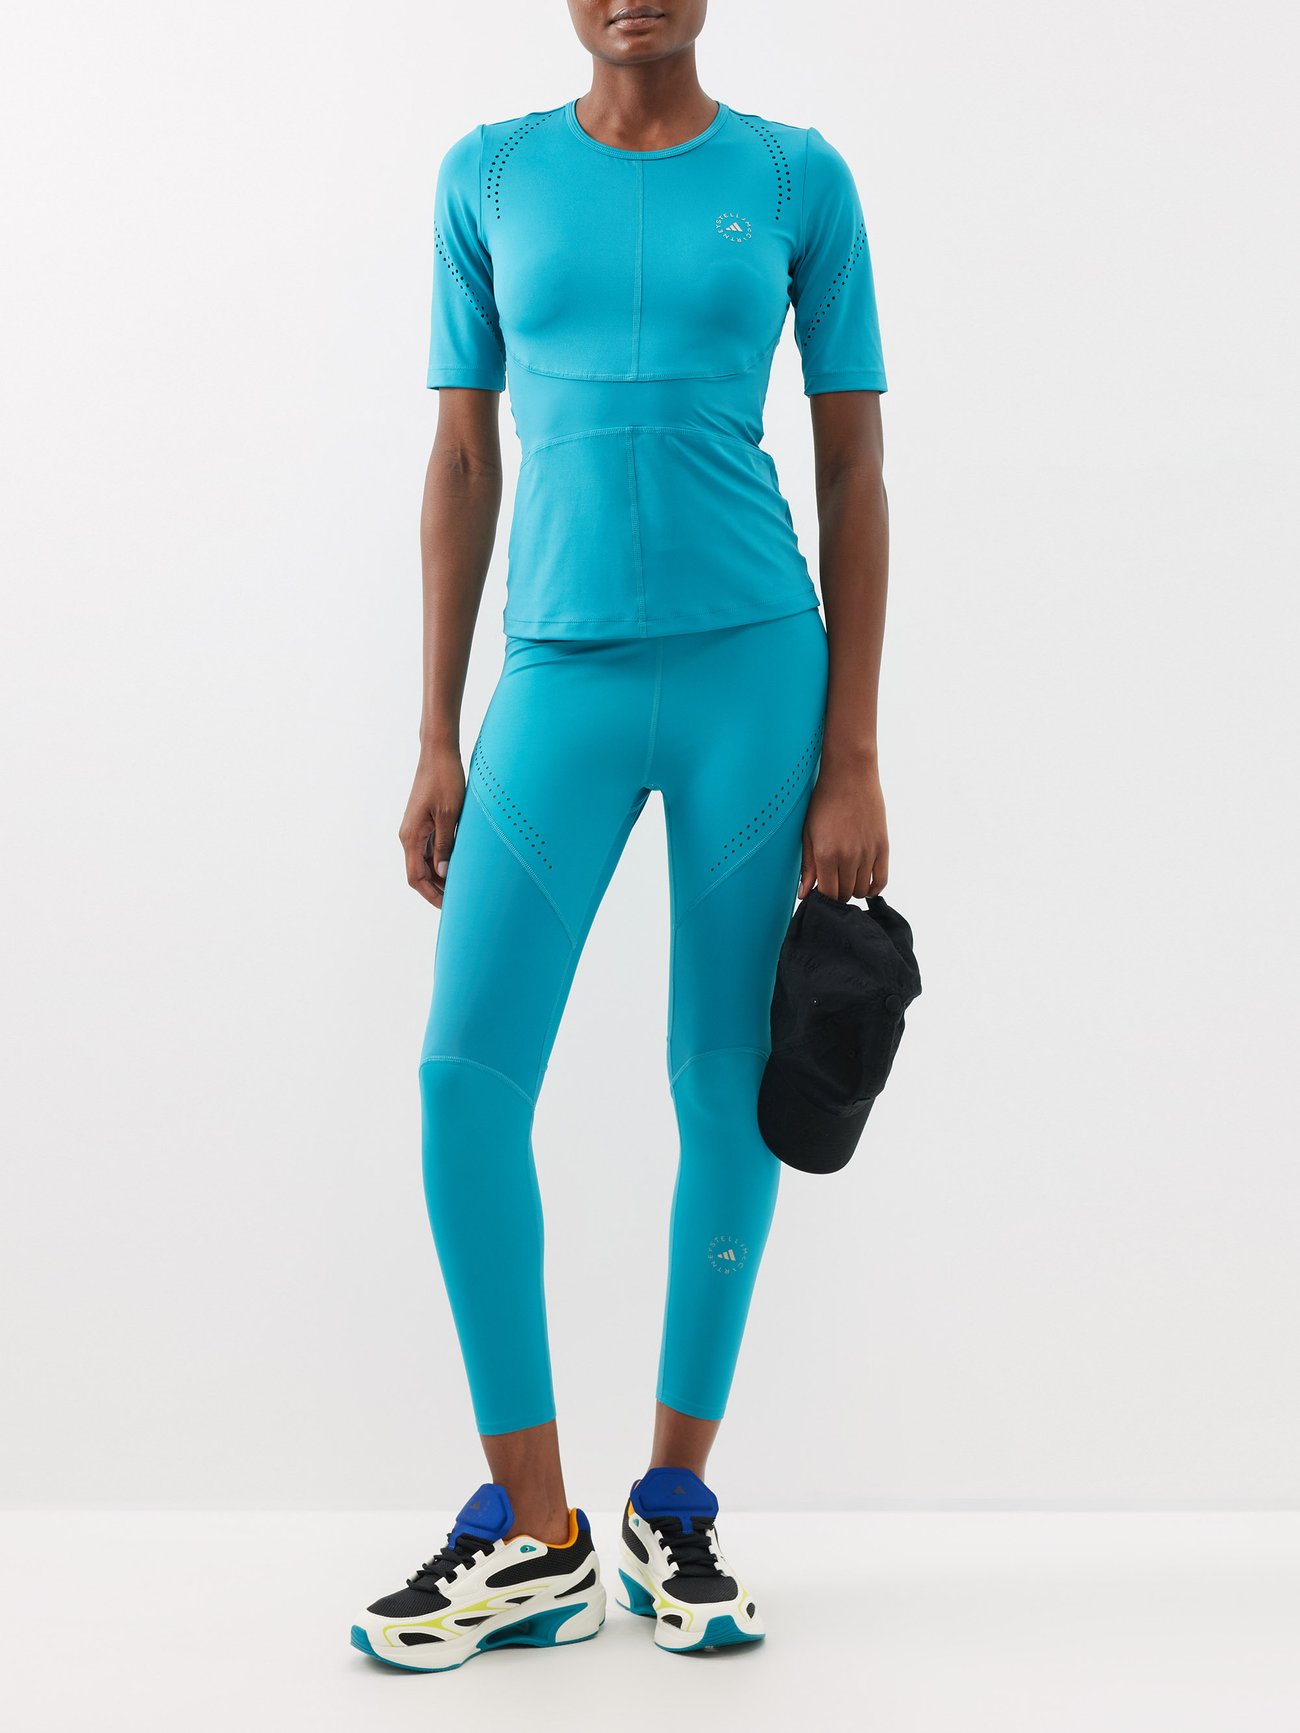 Women's Compression Tights and Shorts